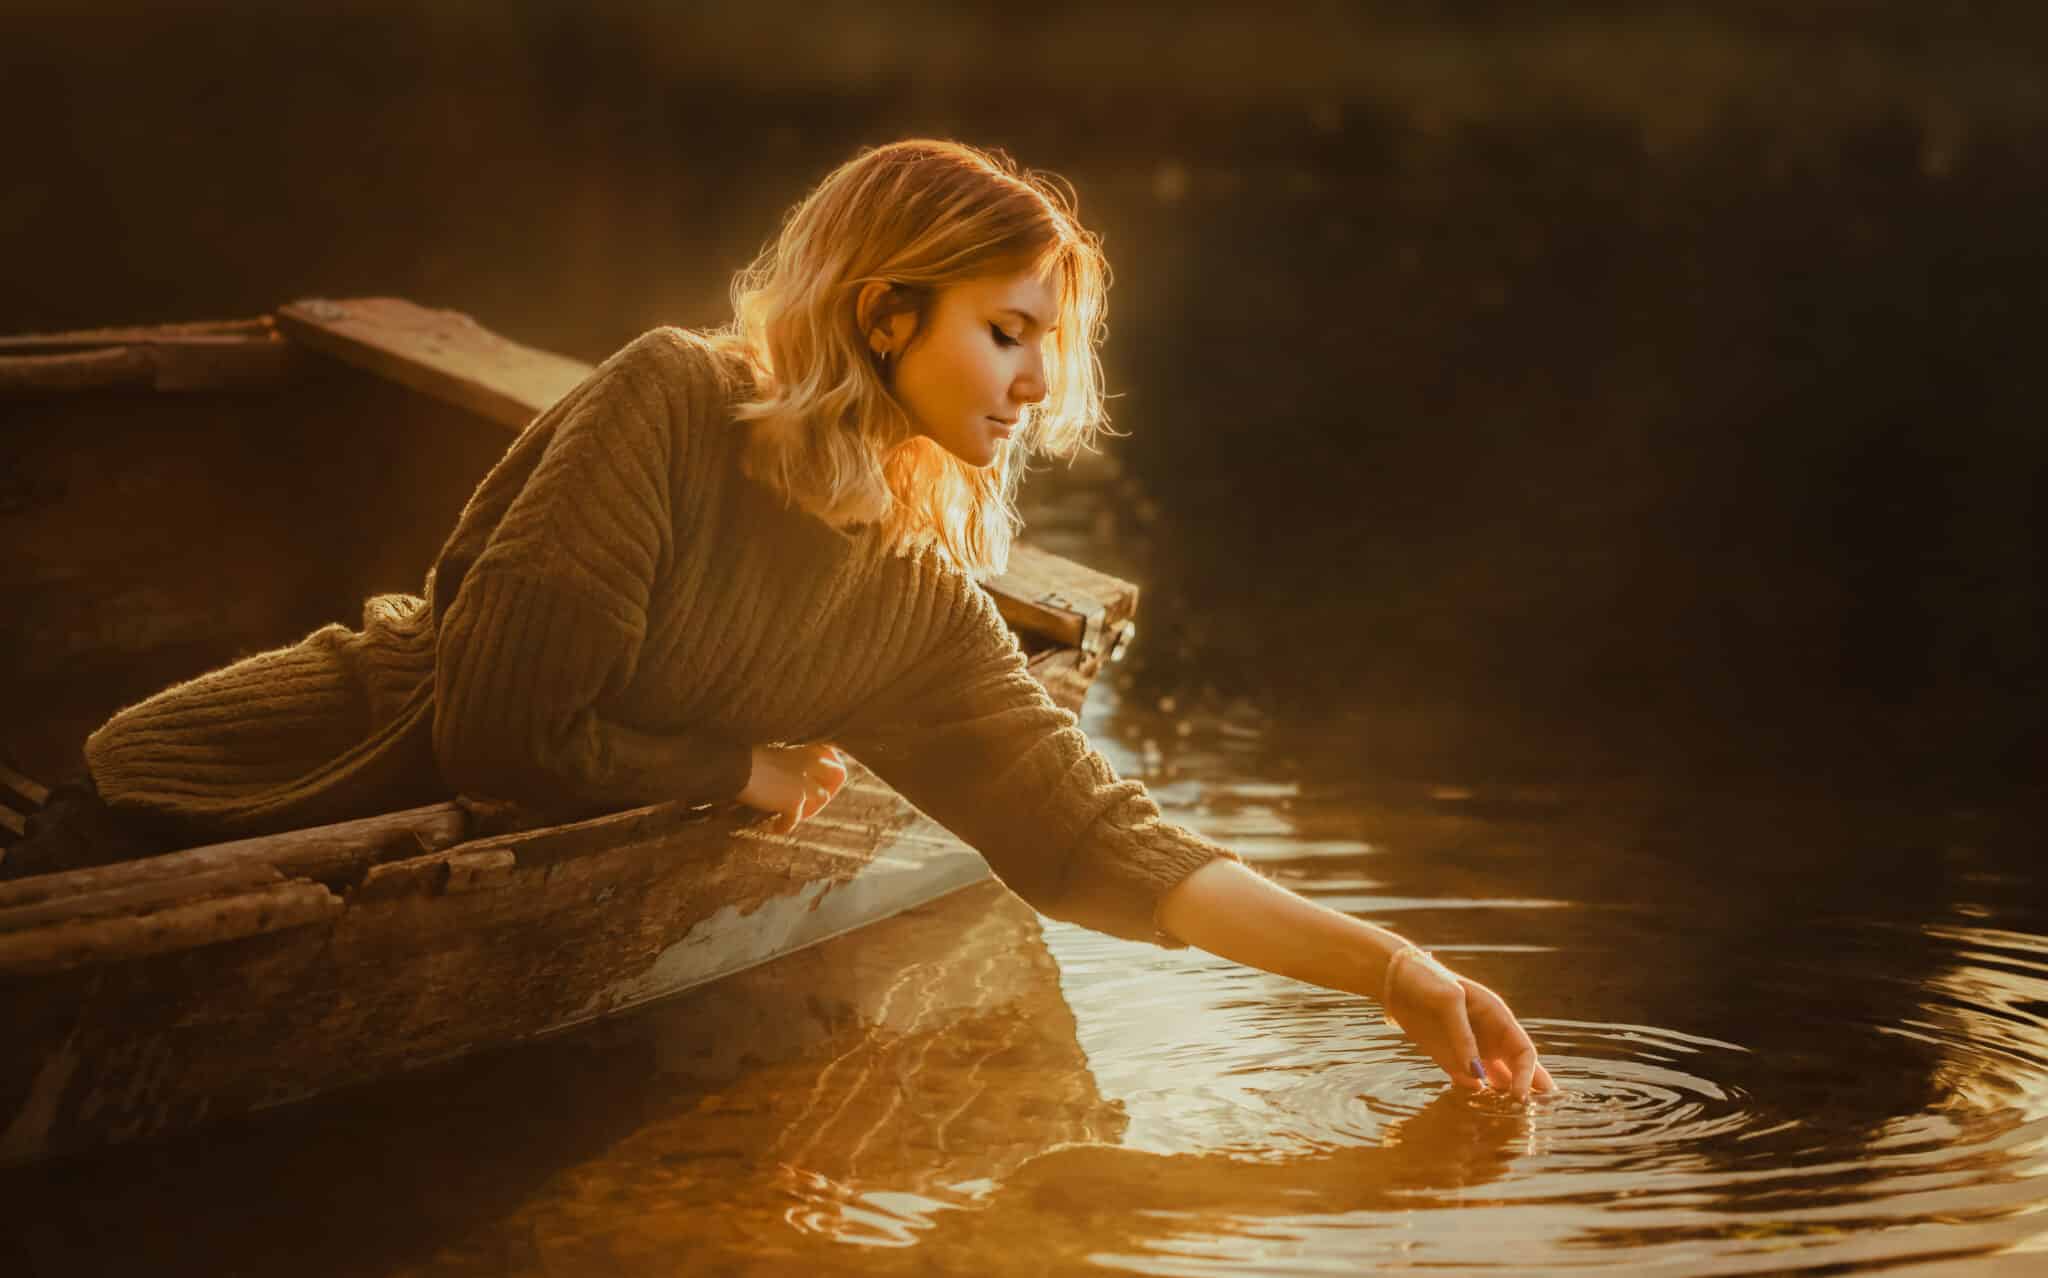 A beautiful blonde woman sits in an old fishing boat reaches and touches the water in the lake